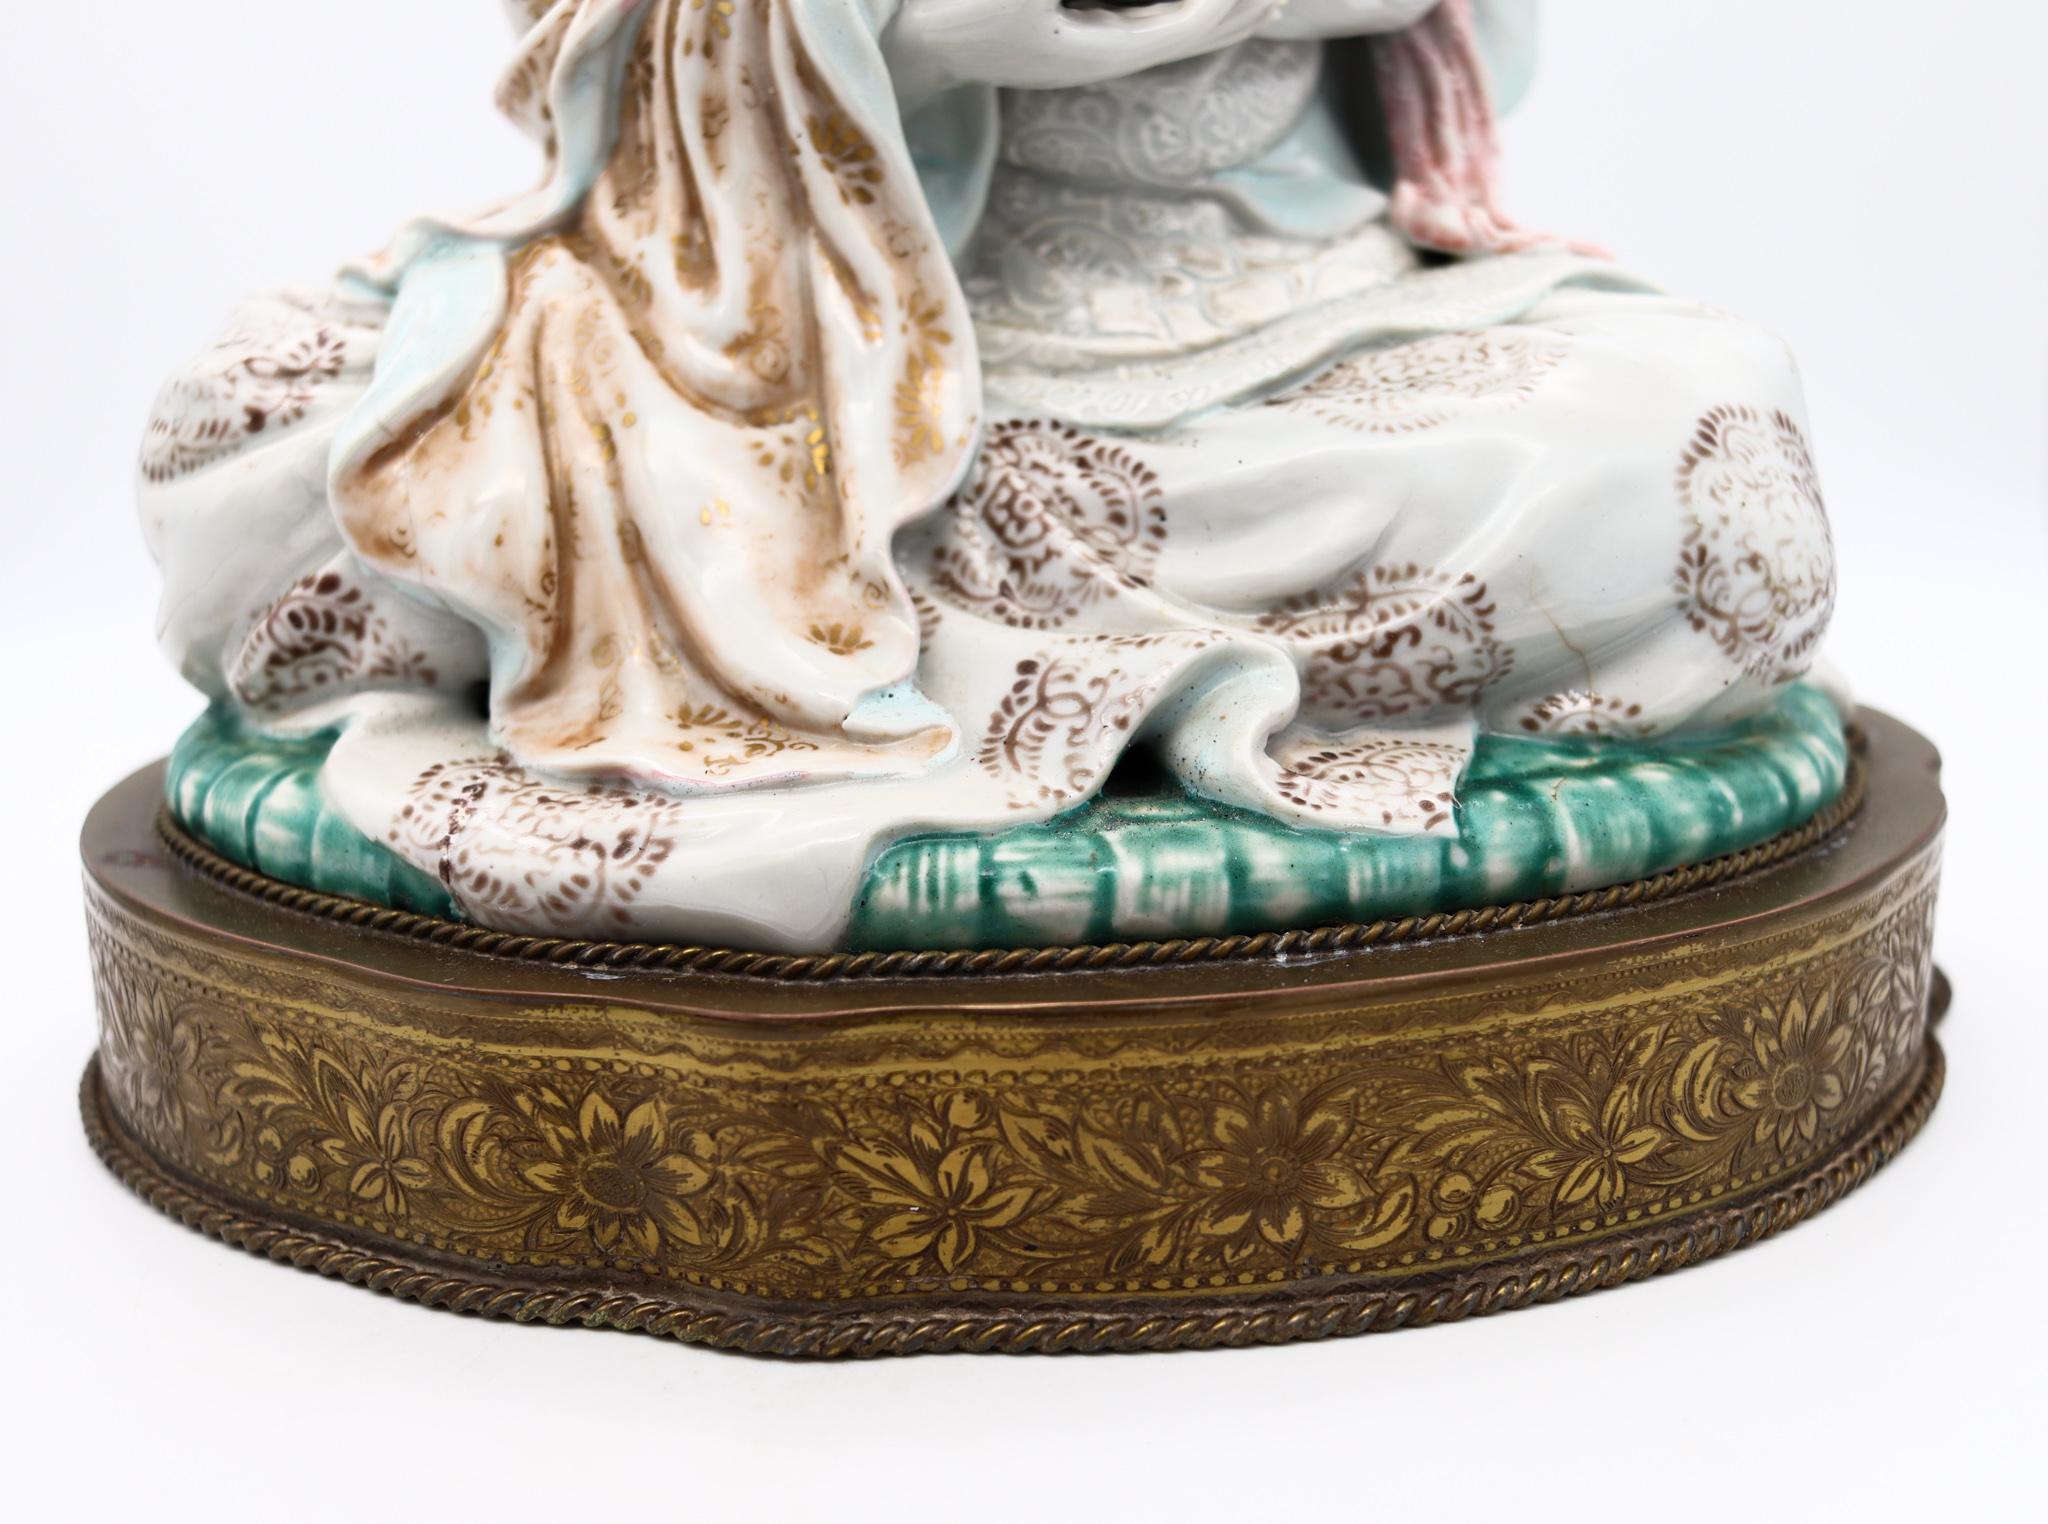 Late 19th Century Japan 1890 Meiji Period Seated Figure of Quan Yin in Enamelled White Porcelain